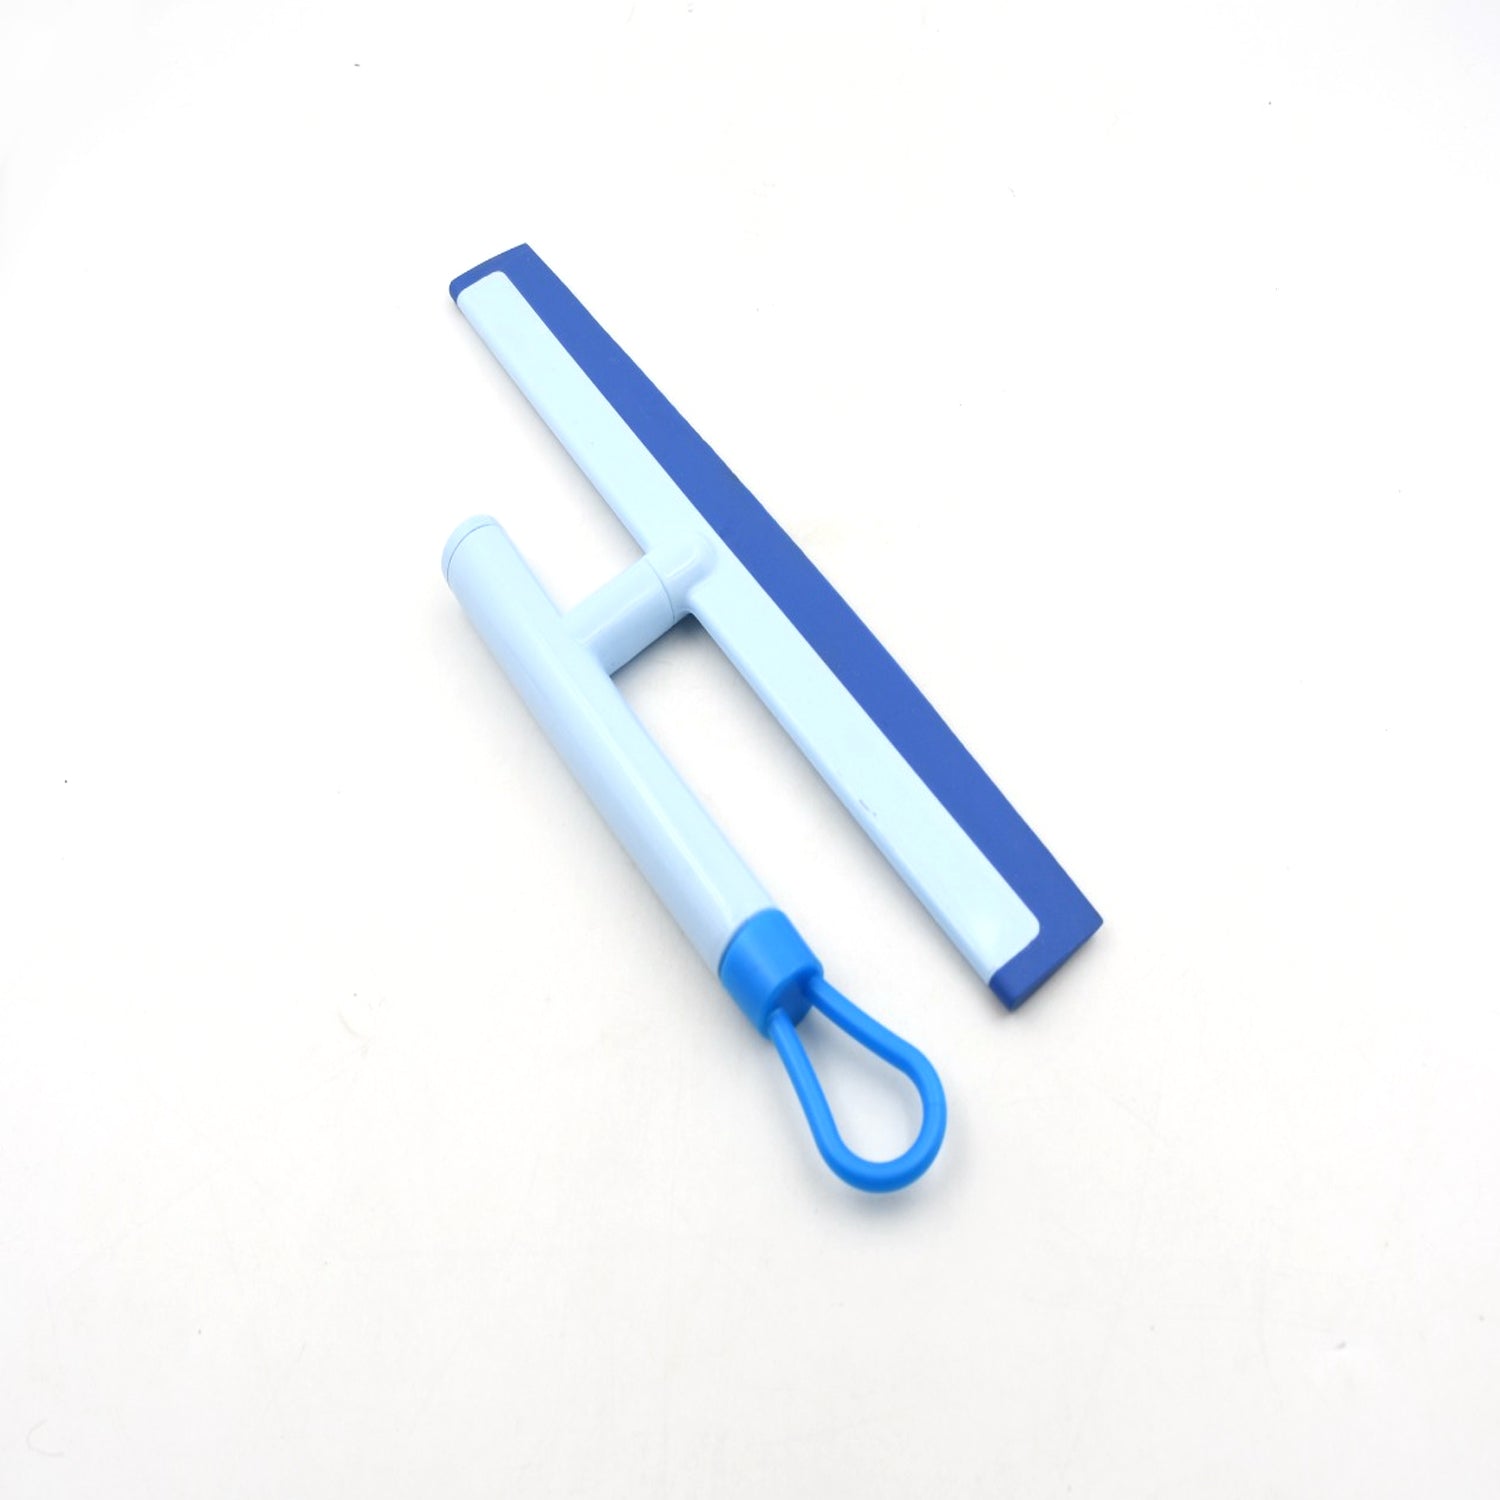 Glass Cleaning Wiper Window Cleaner, for Bathroom, Windows, and Car Glass, Window  Mirror Scraper Brush with Soft Rubber